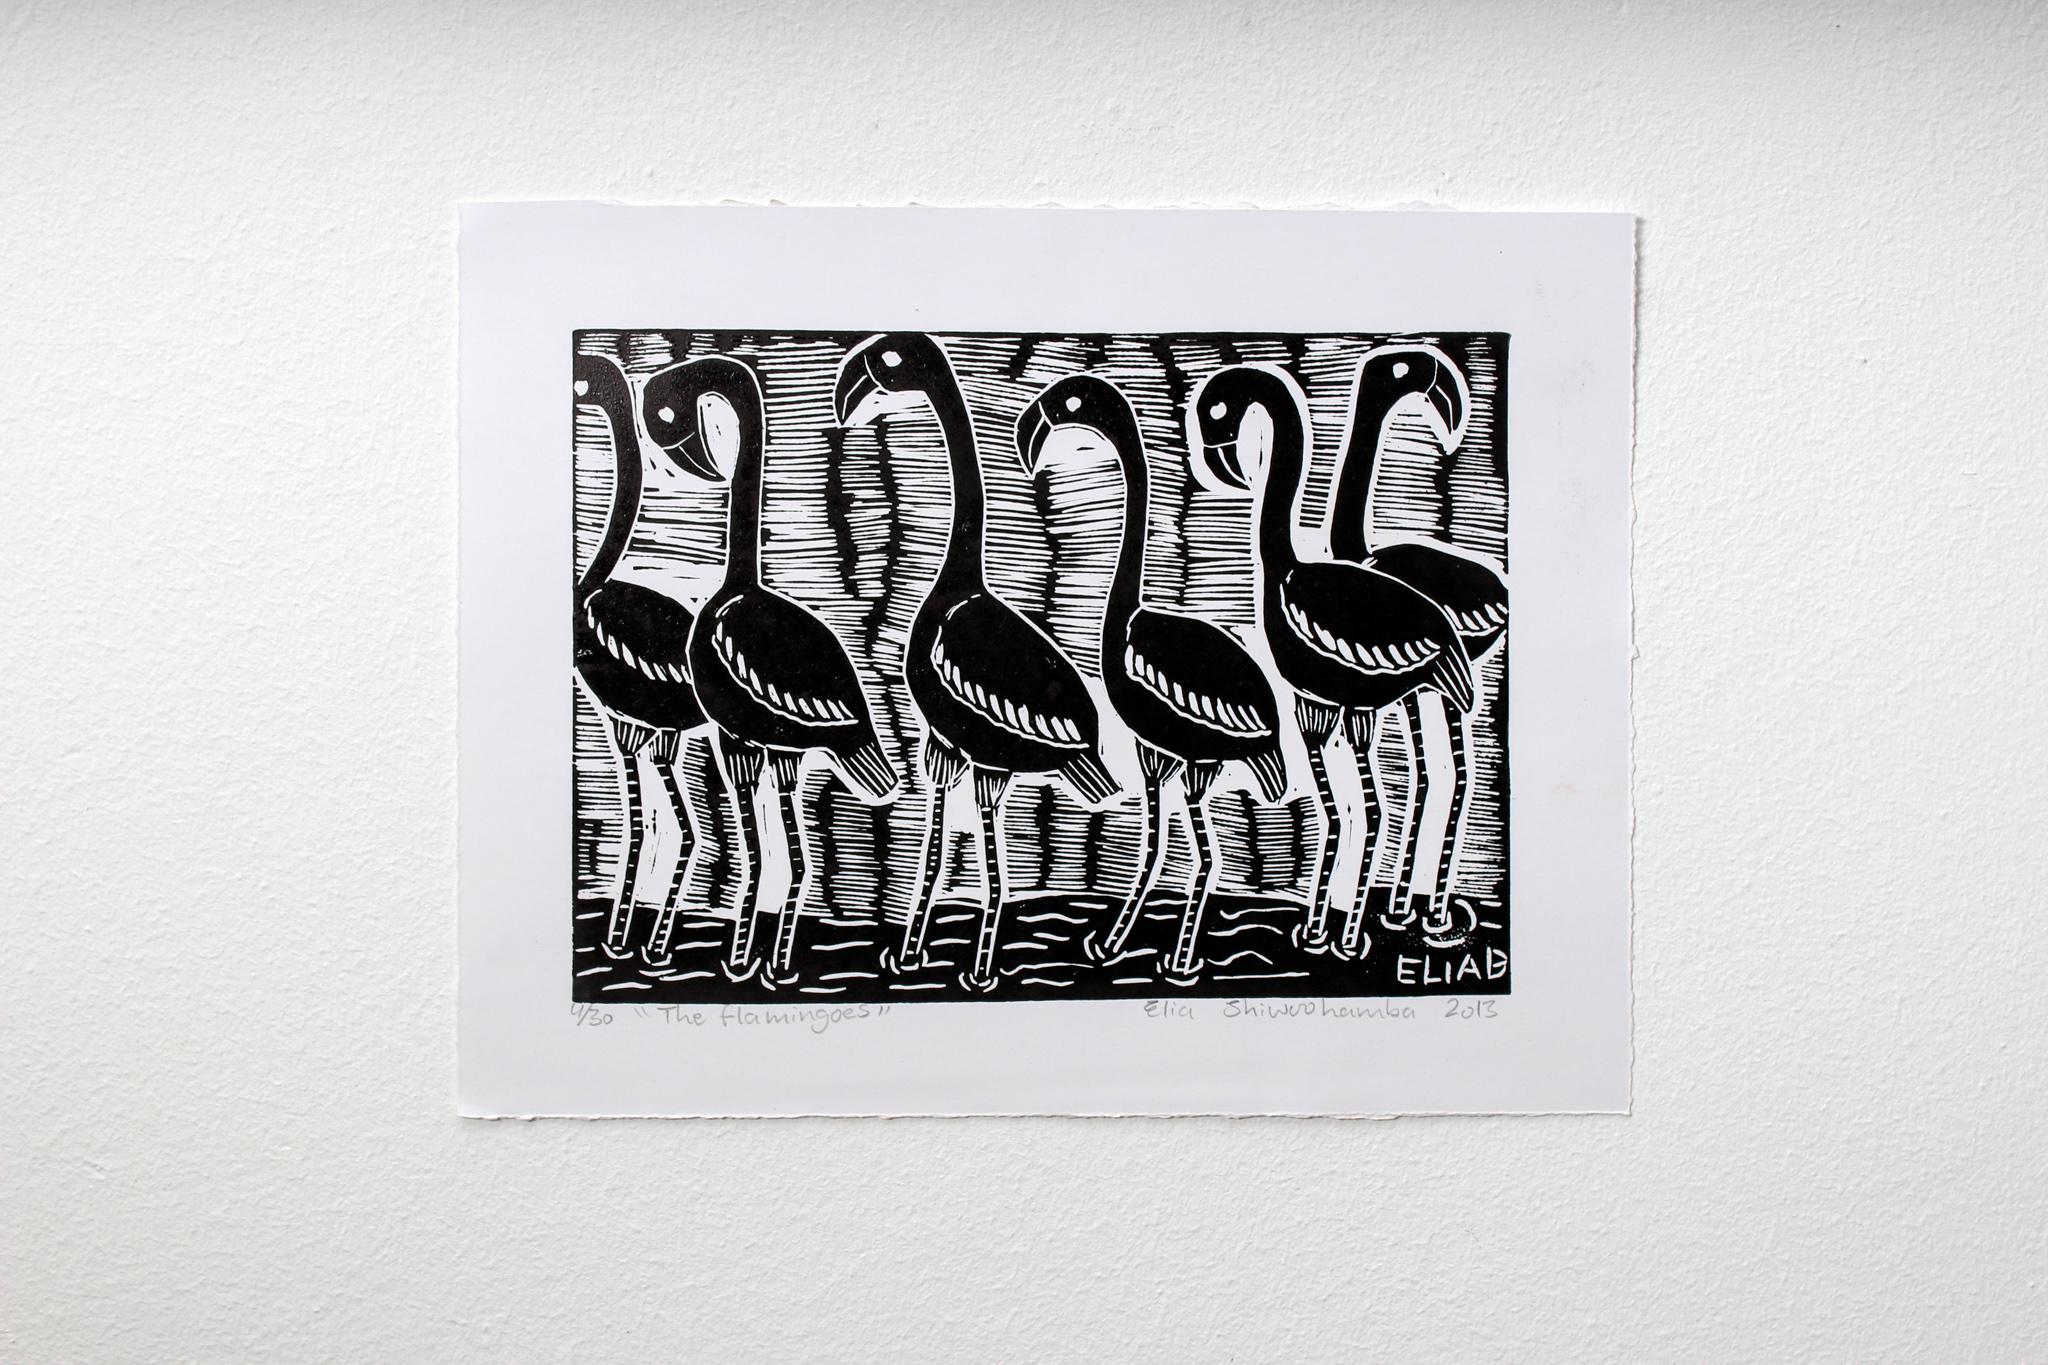 The flamingoes, 2013. Linoleum block print on paper. Edition of 30. 

Elia Shiwoohamba was born in 1981 in Windhoek, Namibia. He graduated from the John Muafangejo Art Centre in Windhoek in 2006. Specialising in printmaking and sculpture,